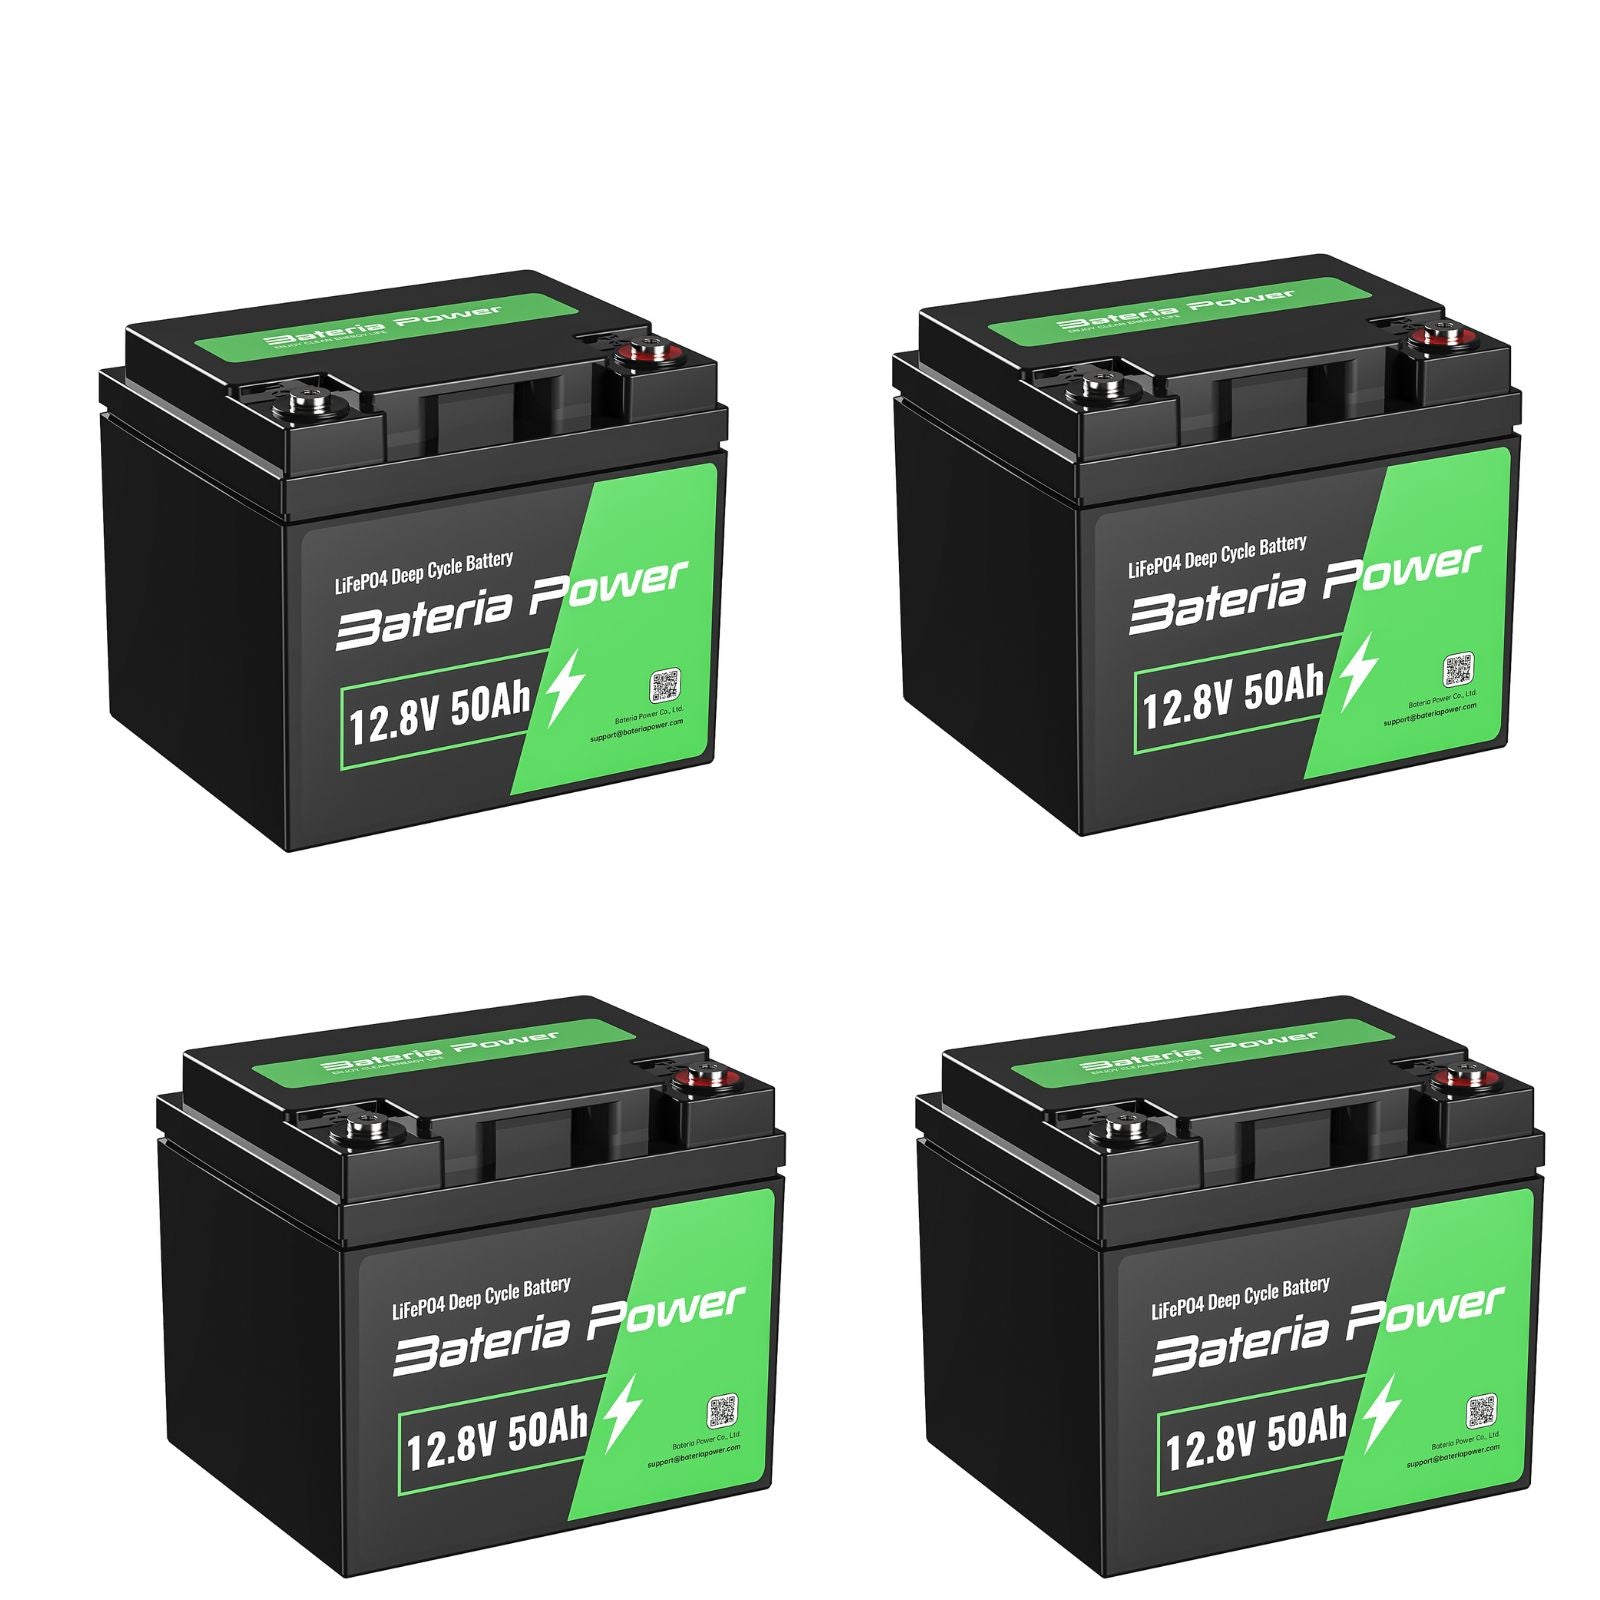 12.8V 50Ah Lifepo4 Deep Cycle Battery 640WH 6000+ Cycle With Built